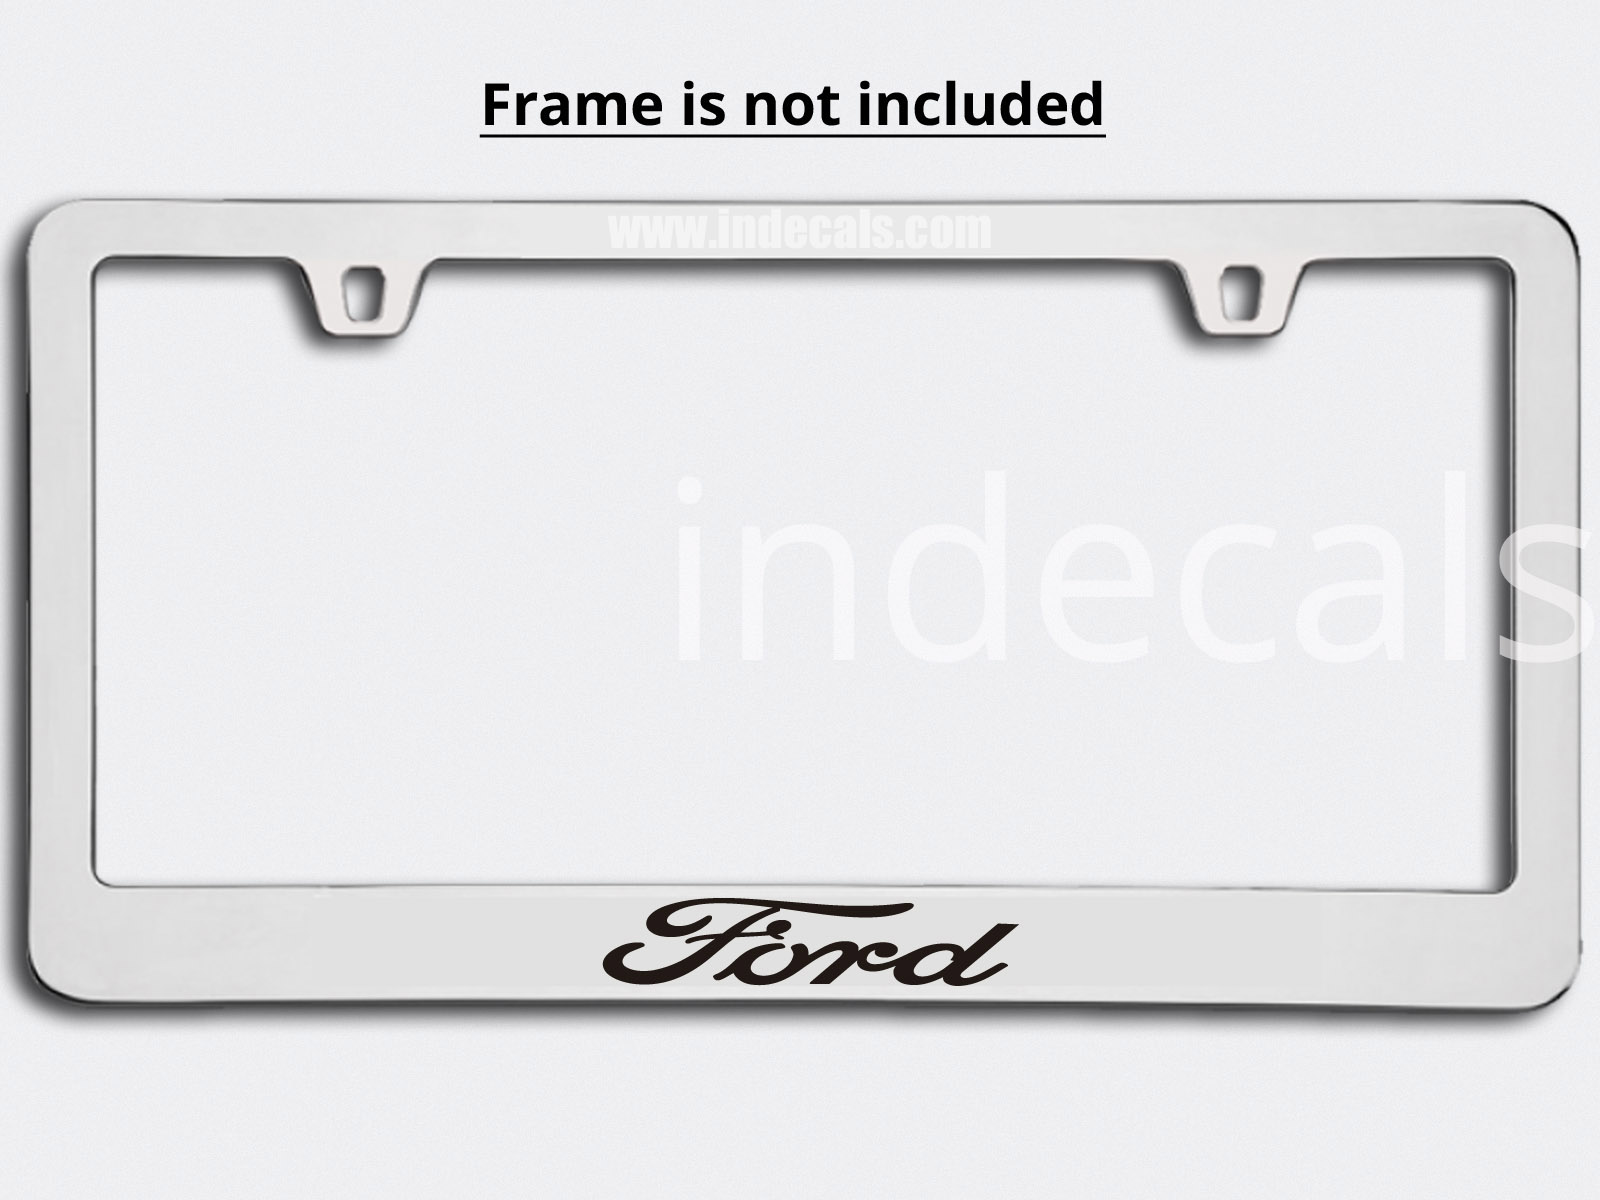 3 x Ford Stickers for Plate Frame - Black